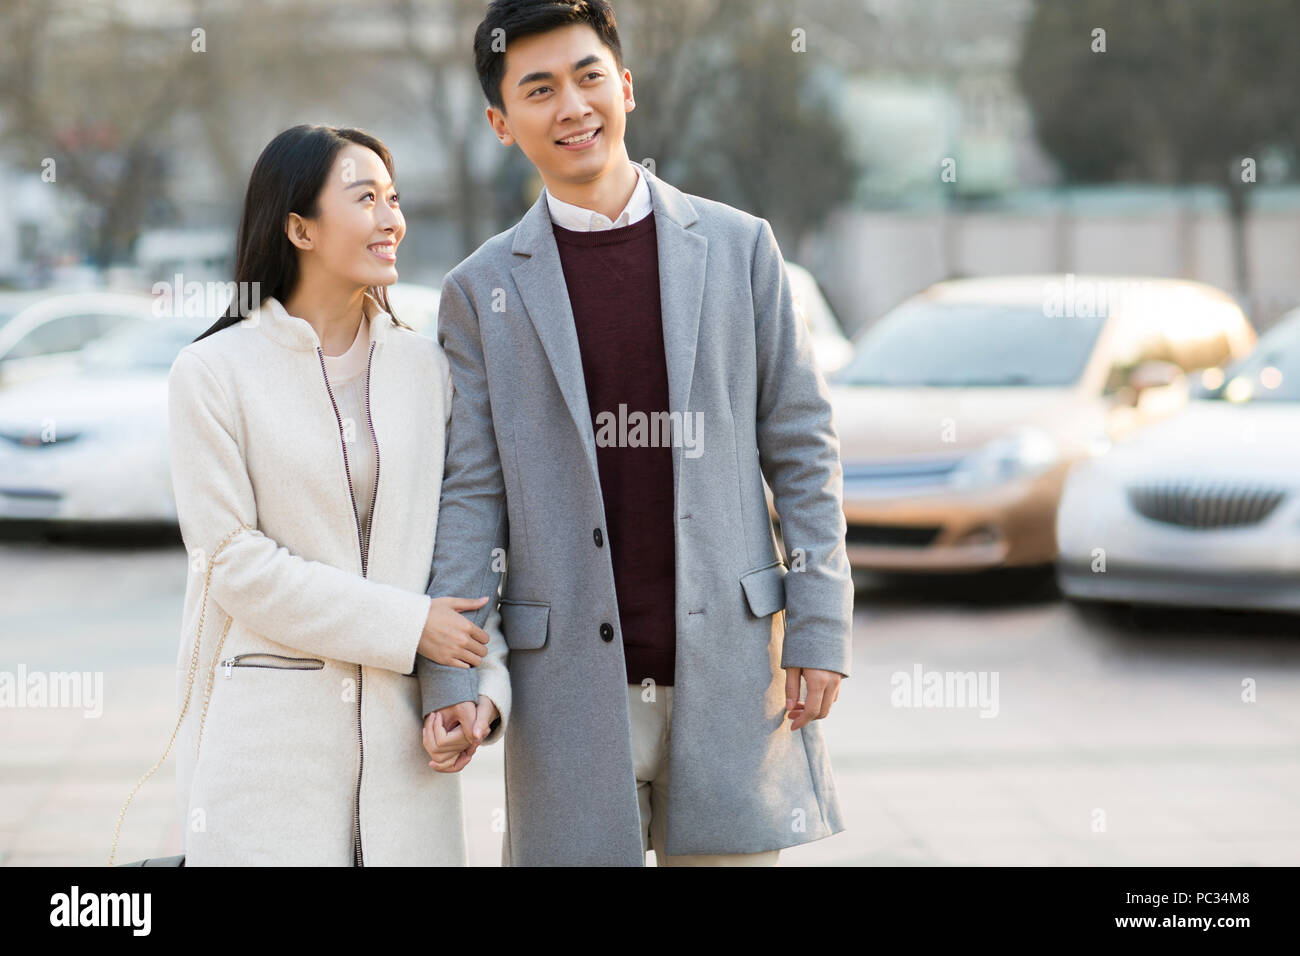 Cheerful young Chinese couple holding hands walking Stock Photo